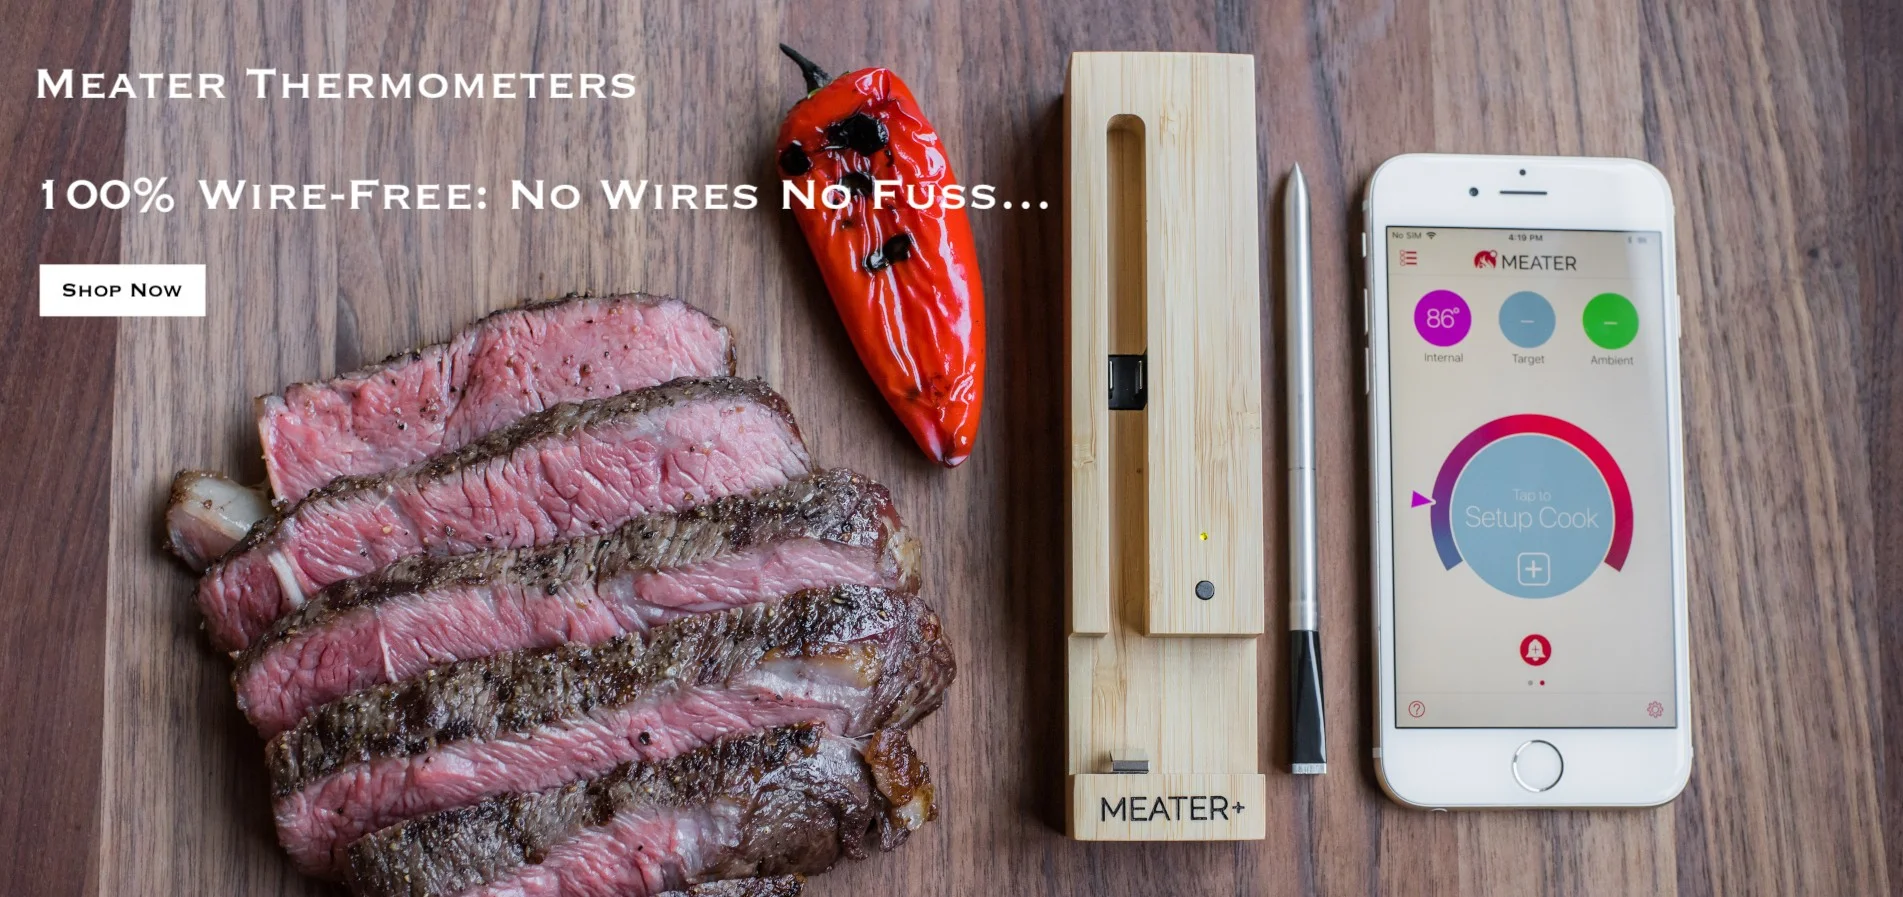 Meater Thermometers